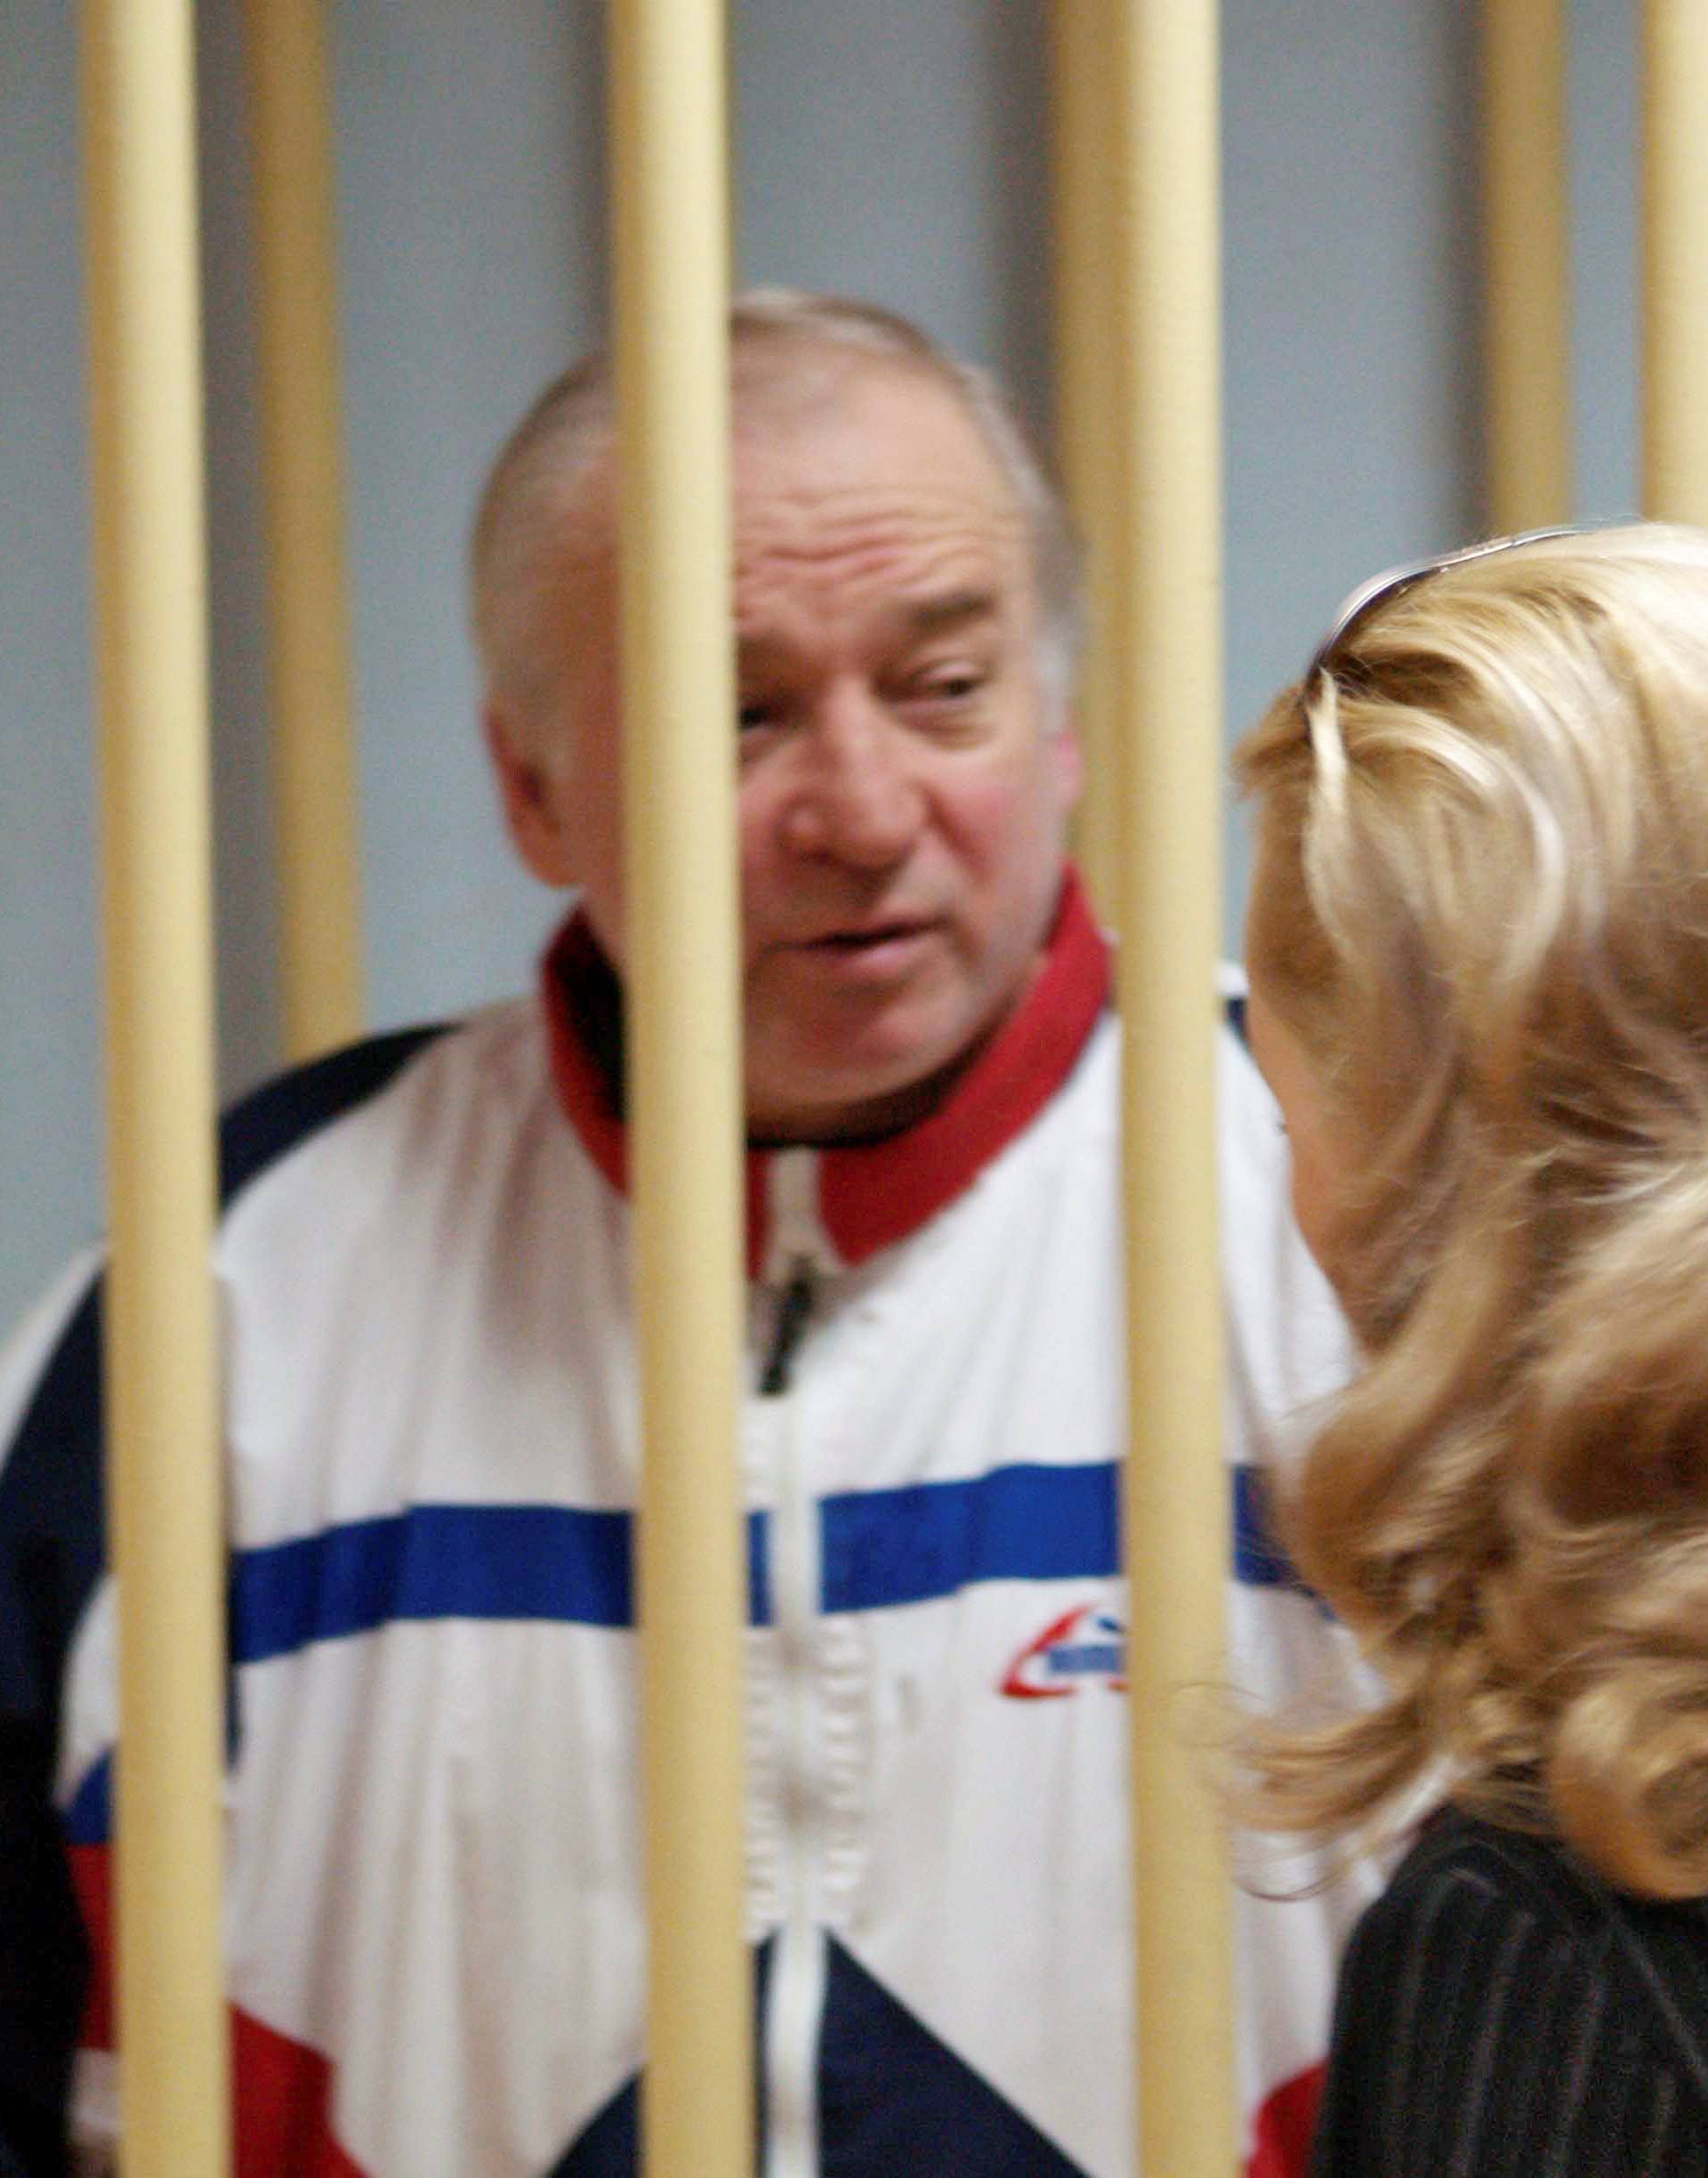 Sergei Skripal, a former colonel of Russia's GRU military intelligence service, looks on inside the defendants' cage as he attends a hearing at the Moscow military district court